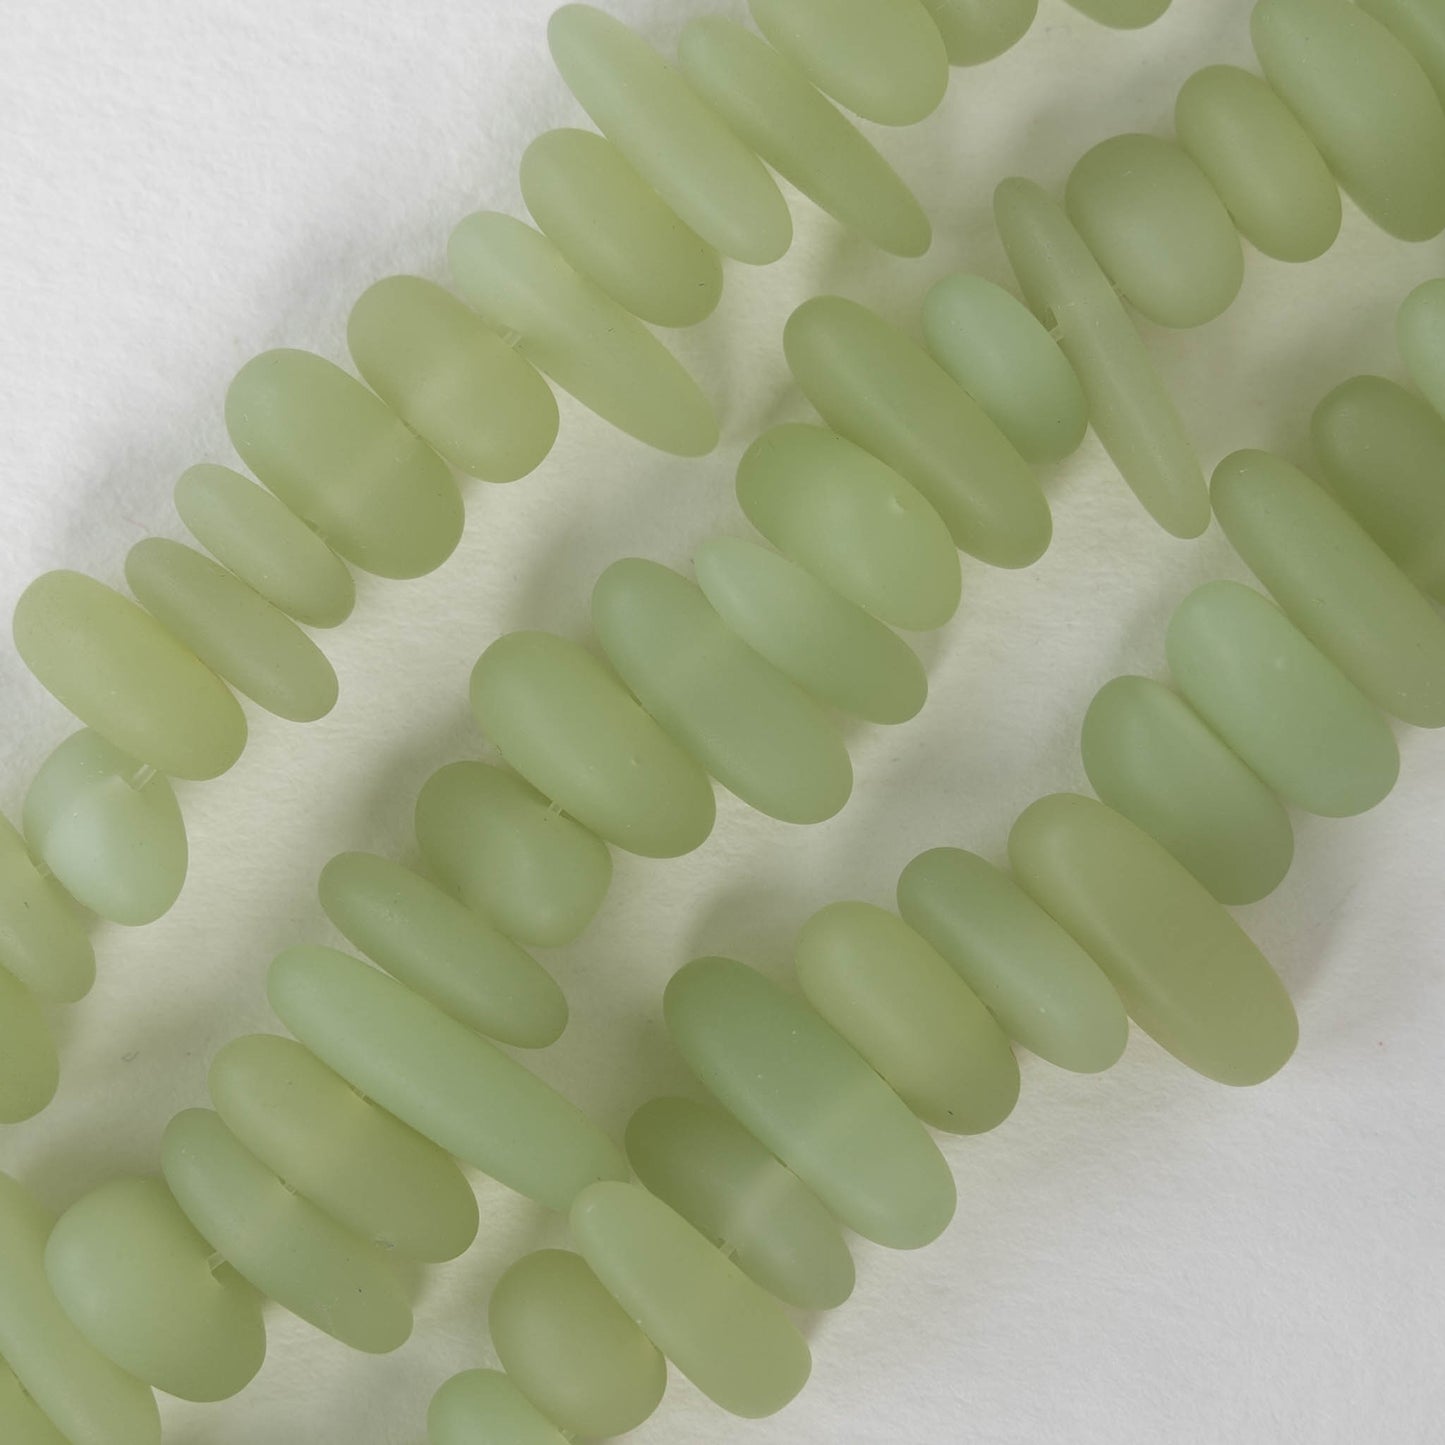 Frosted Glass Pebbles - Opaque Light Olive Green ~ 50 Beads